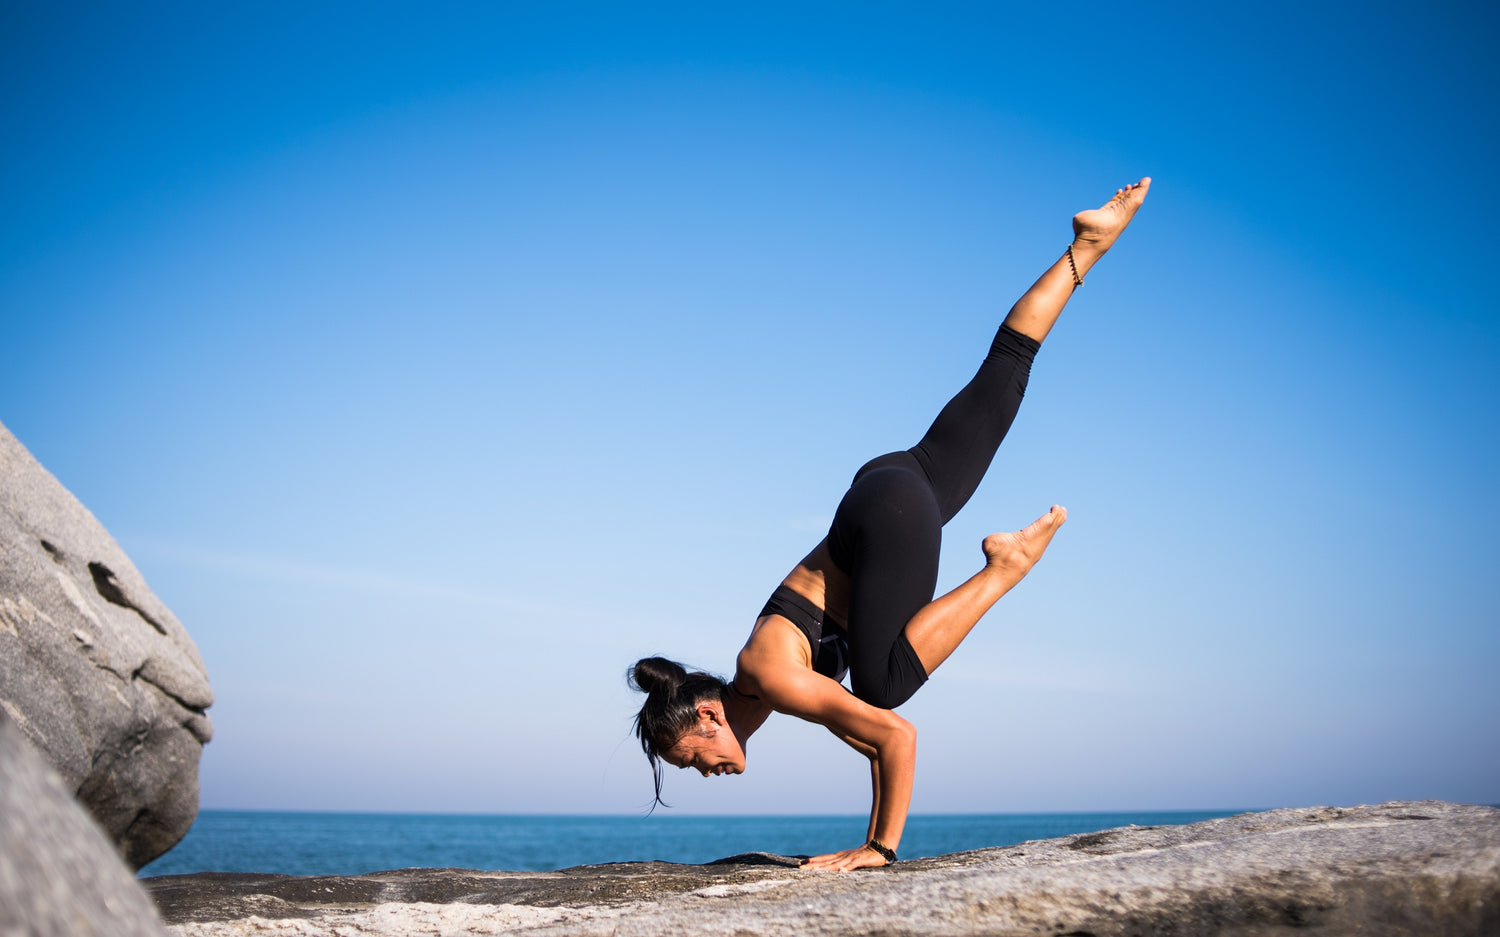 Woman doing a yoga pose on a rocky surface with a clear blue sky behind her.